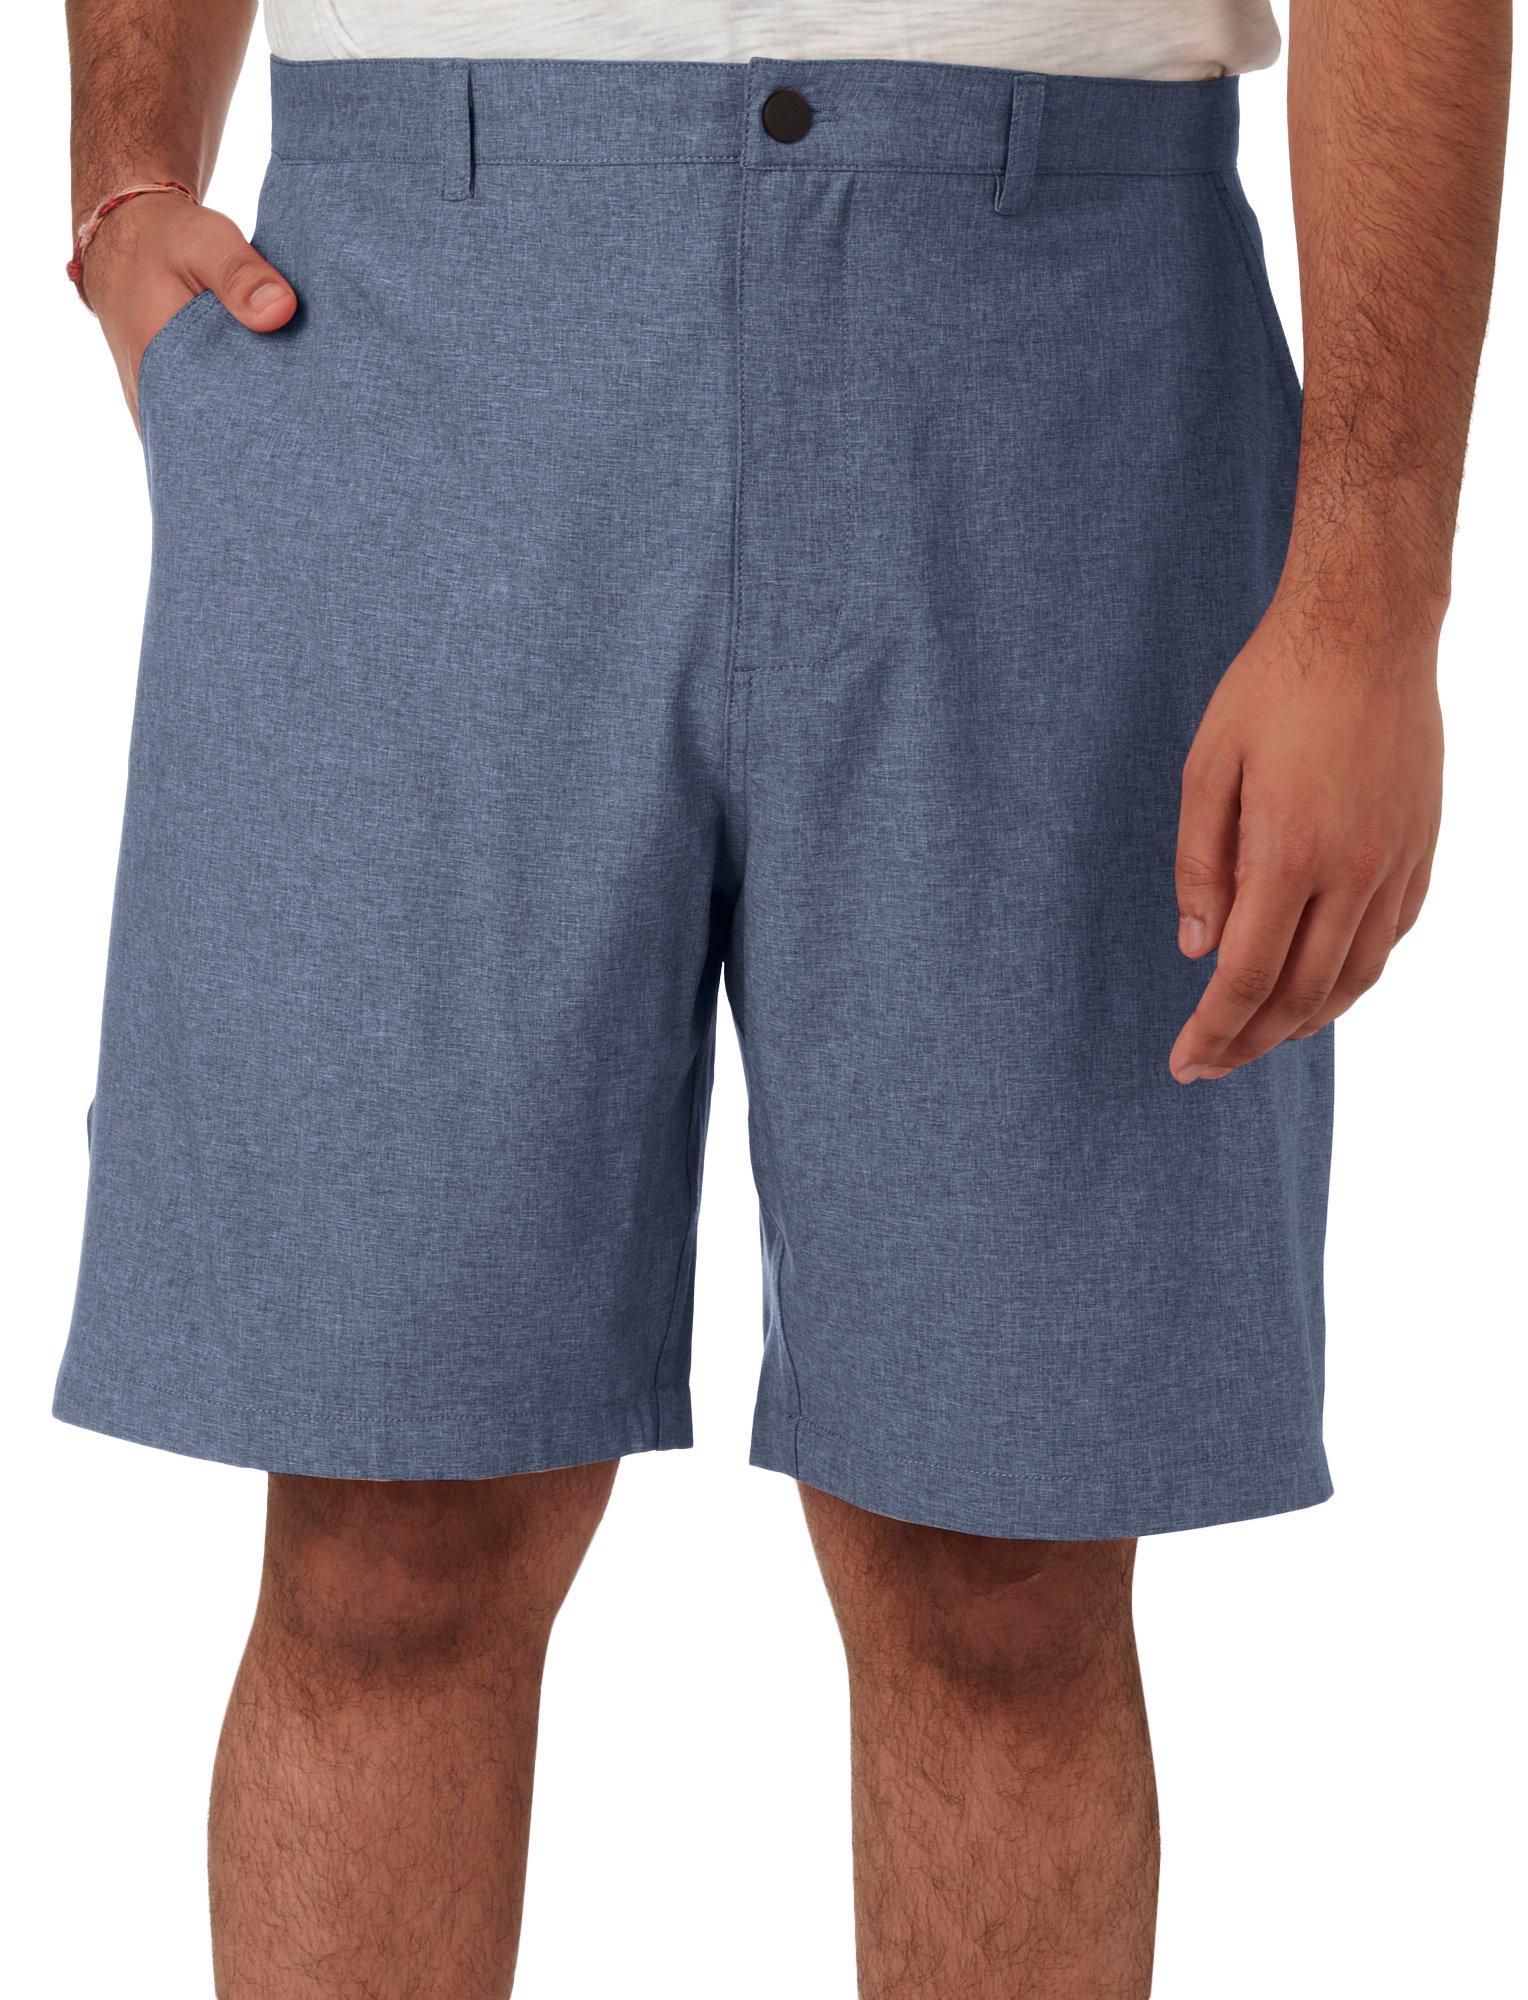 Mens Cool  Flat Front Solid Heather Shorts